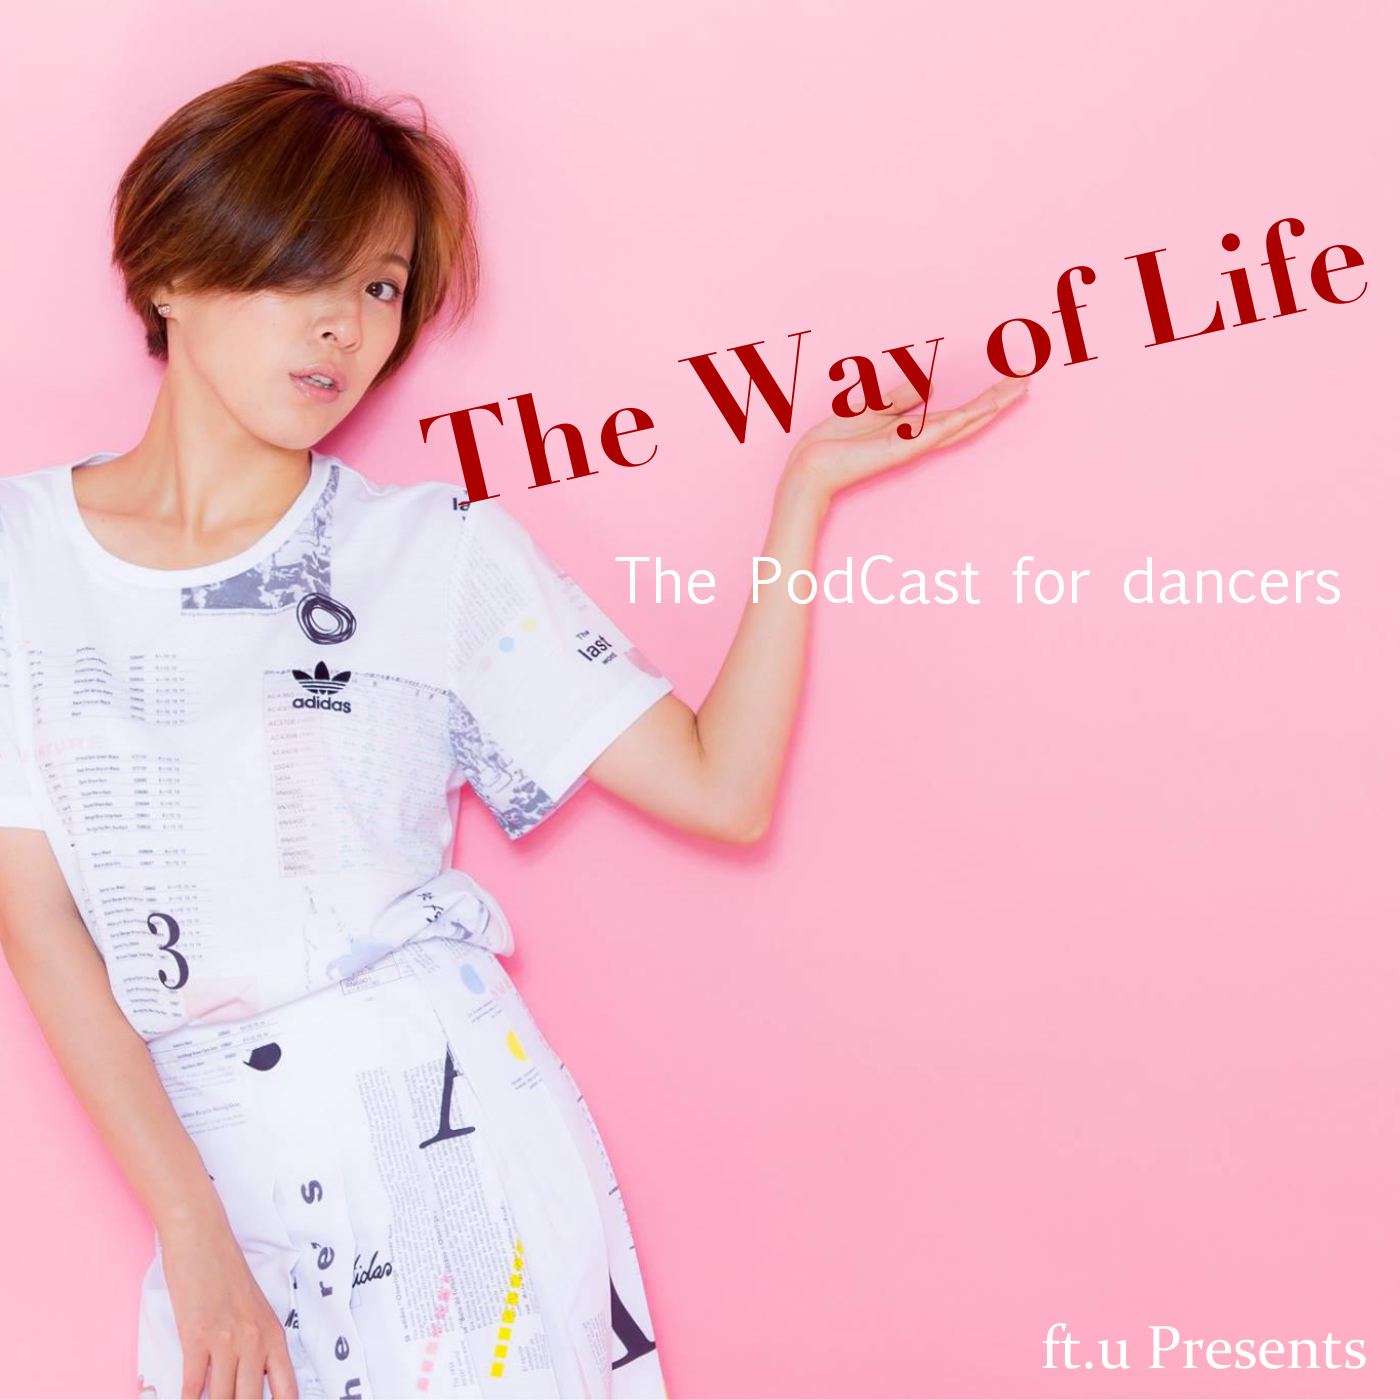 The Way of Life Podcast for dancers